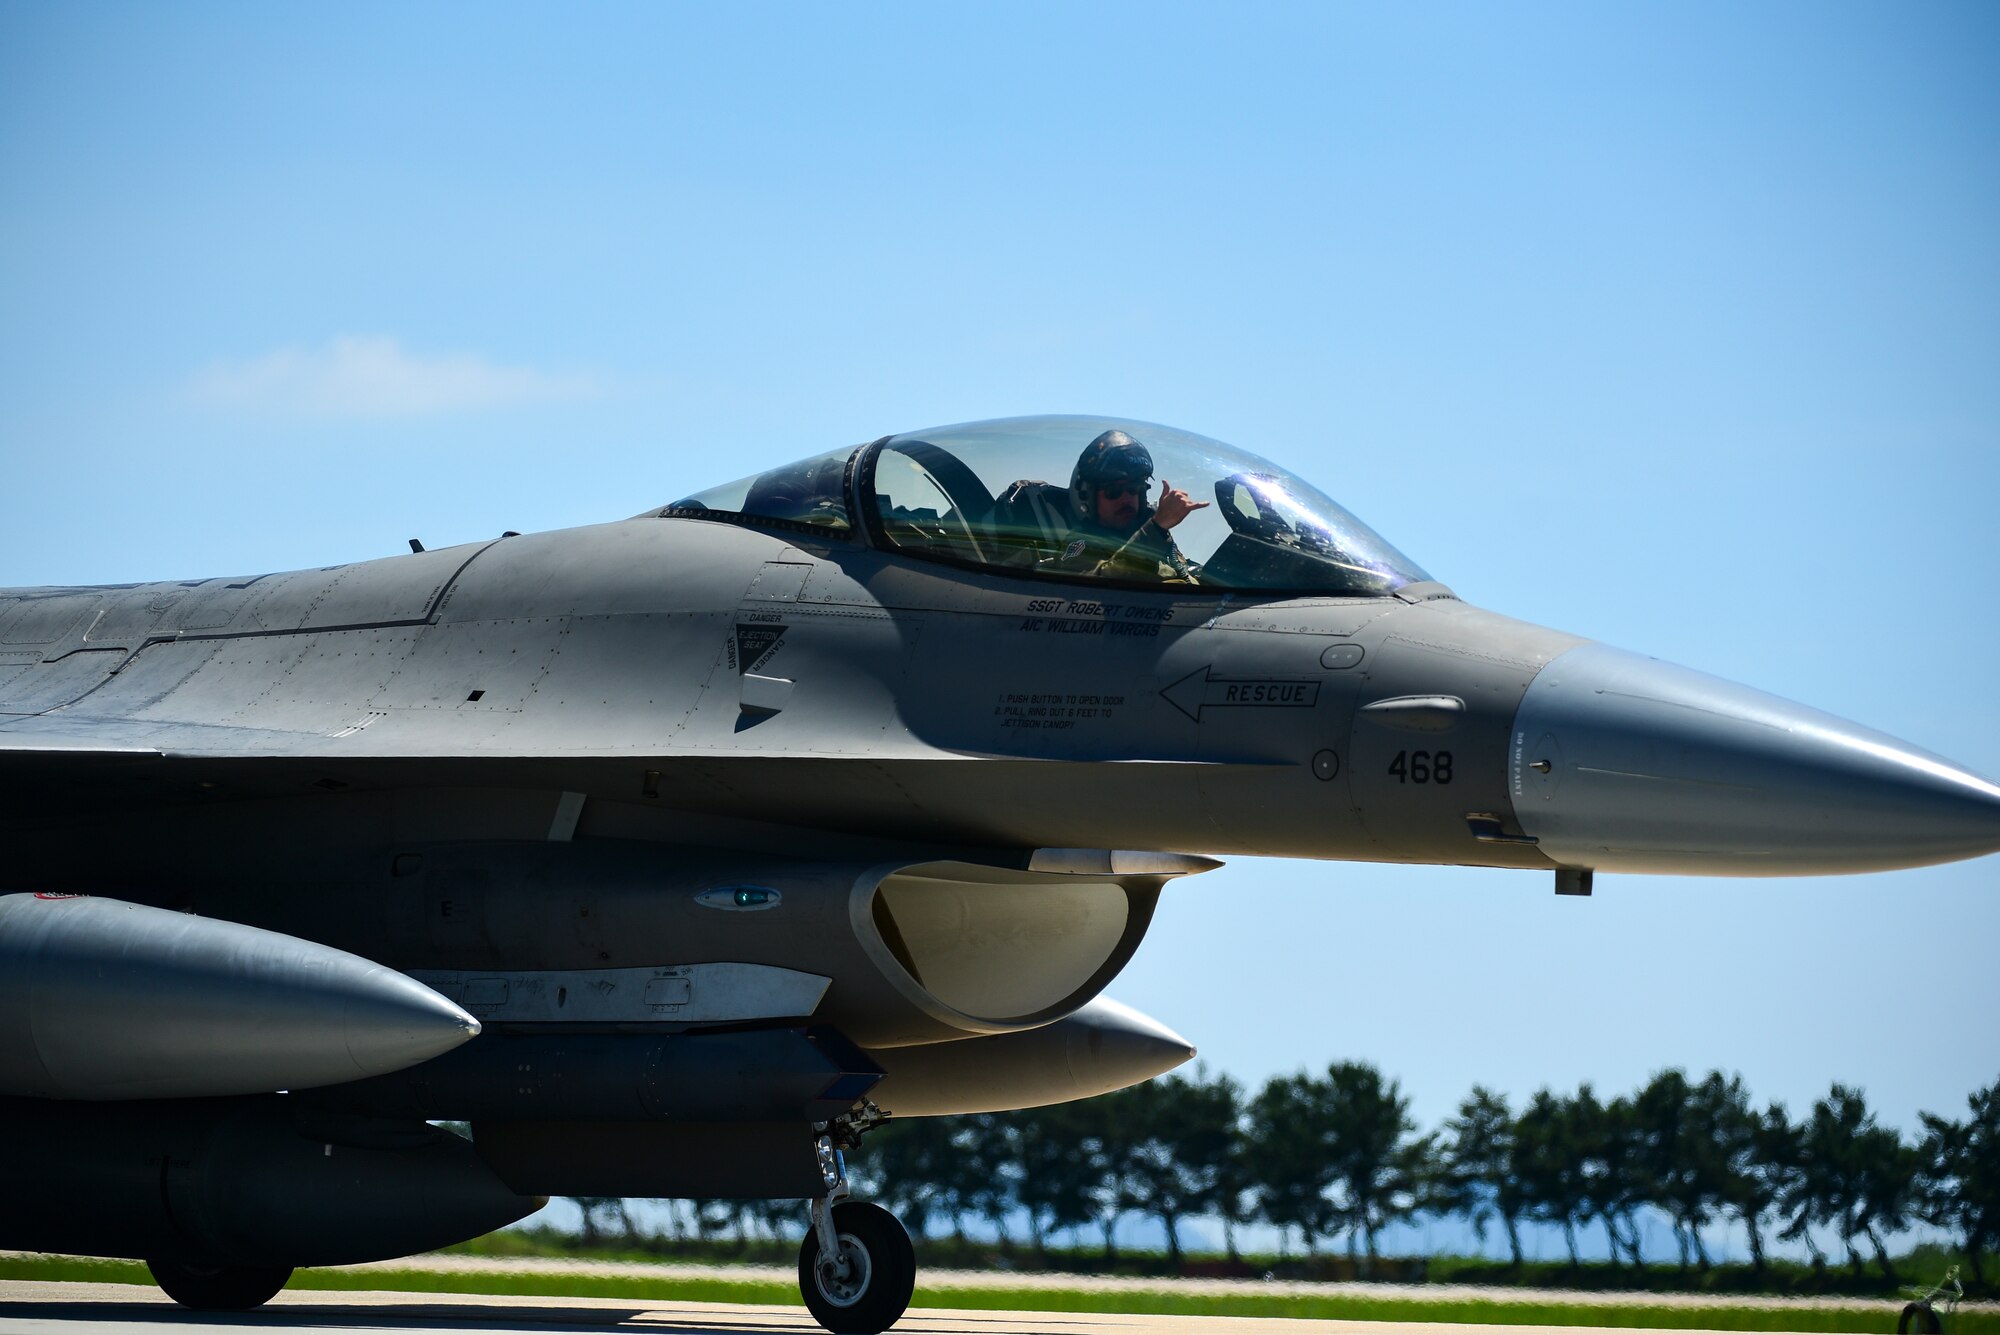 An F-16 Fighting Falcon taxis at Kunsan Air Base, Republic of Korea, July 15, 2021. The last of the 8th Fighter Wing jets returned home after supporting a month-long multinational training at event Red Flag-Alaska 21-2, while practicing Agile Combat Employment tactics. (U.S. Air Force photo by Senior Airman Suzie Plotnikov)